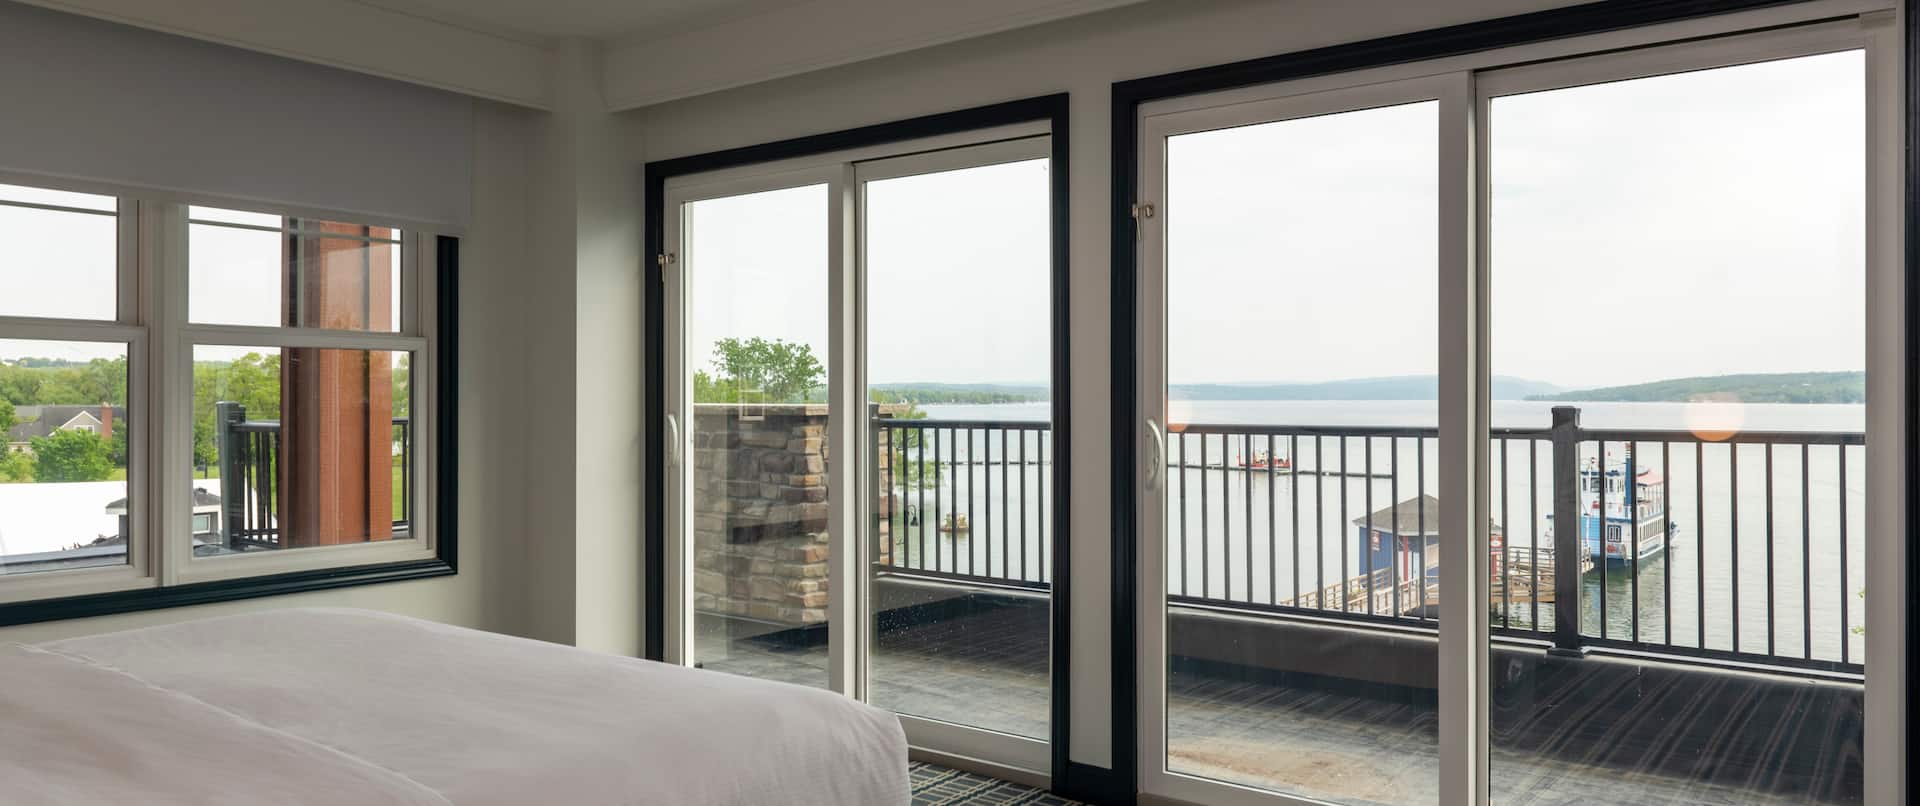 Bed in room with view of lake